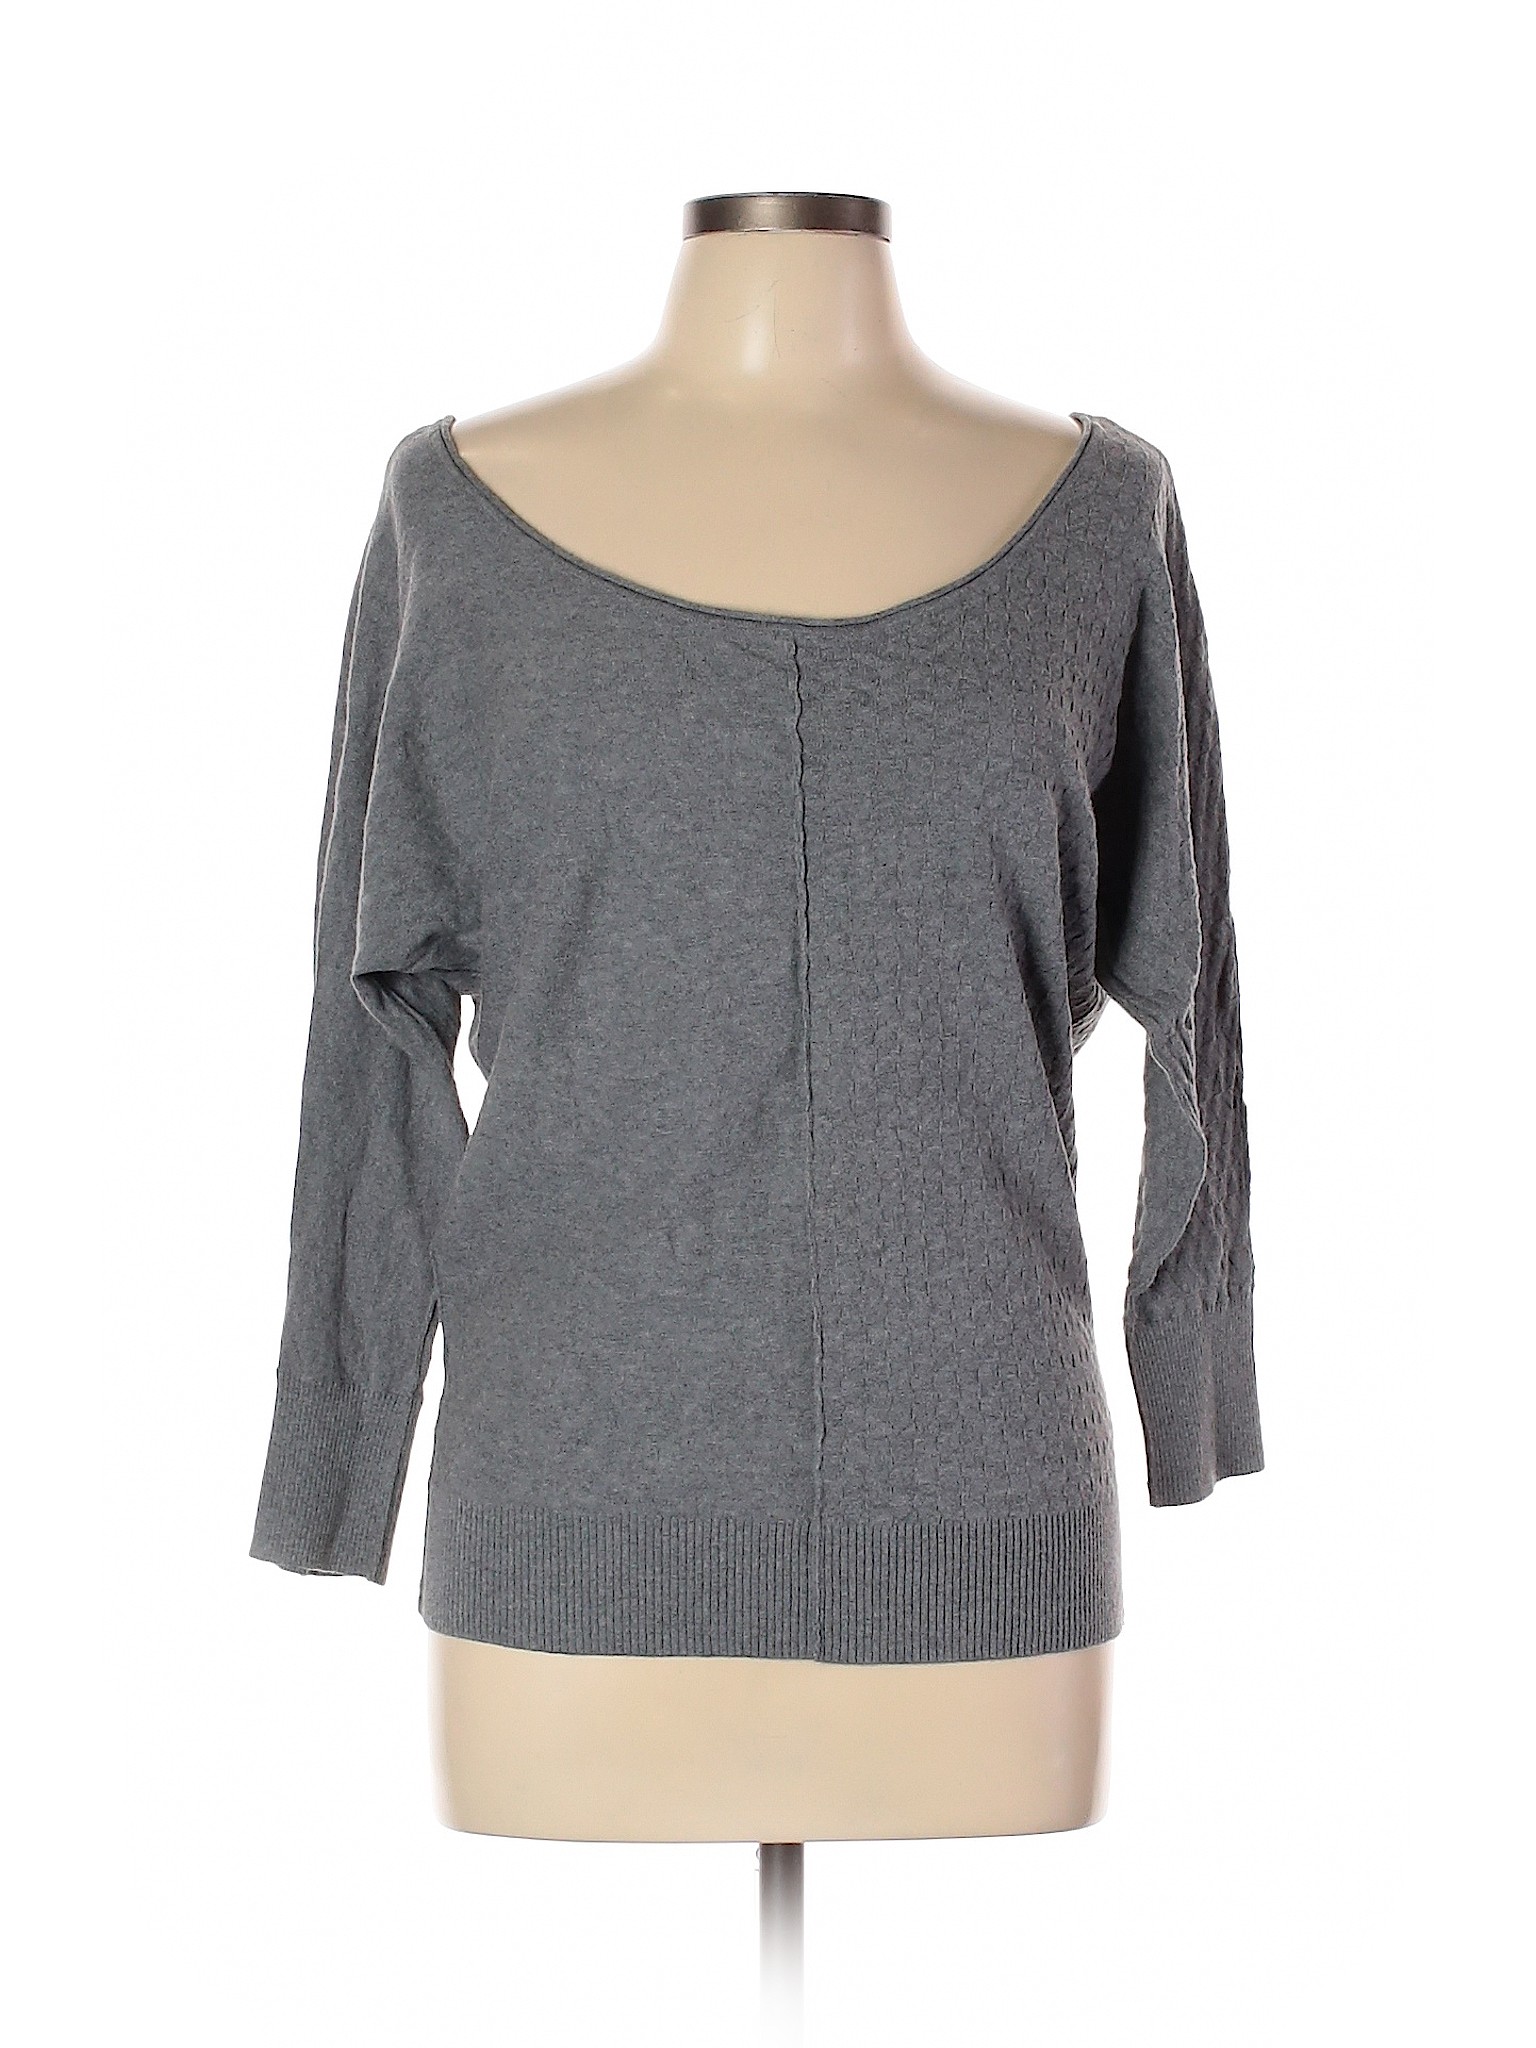 Guess Women Gray Pullover Sweater L | eBay